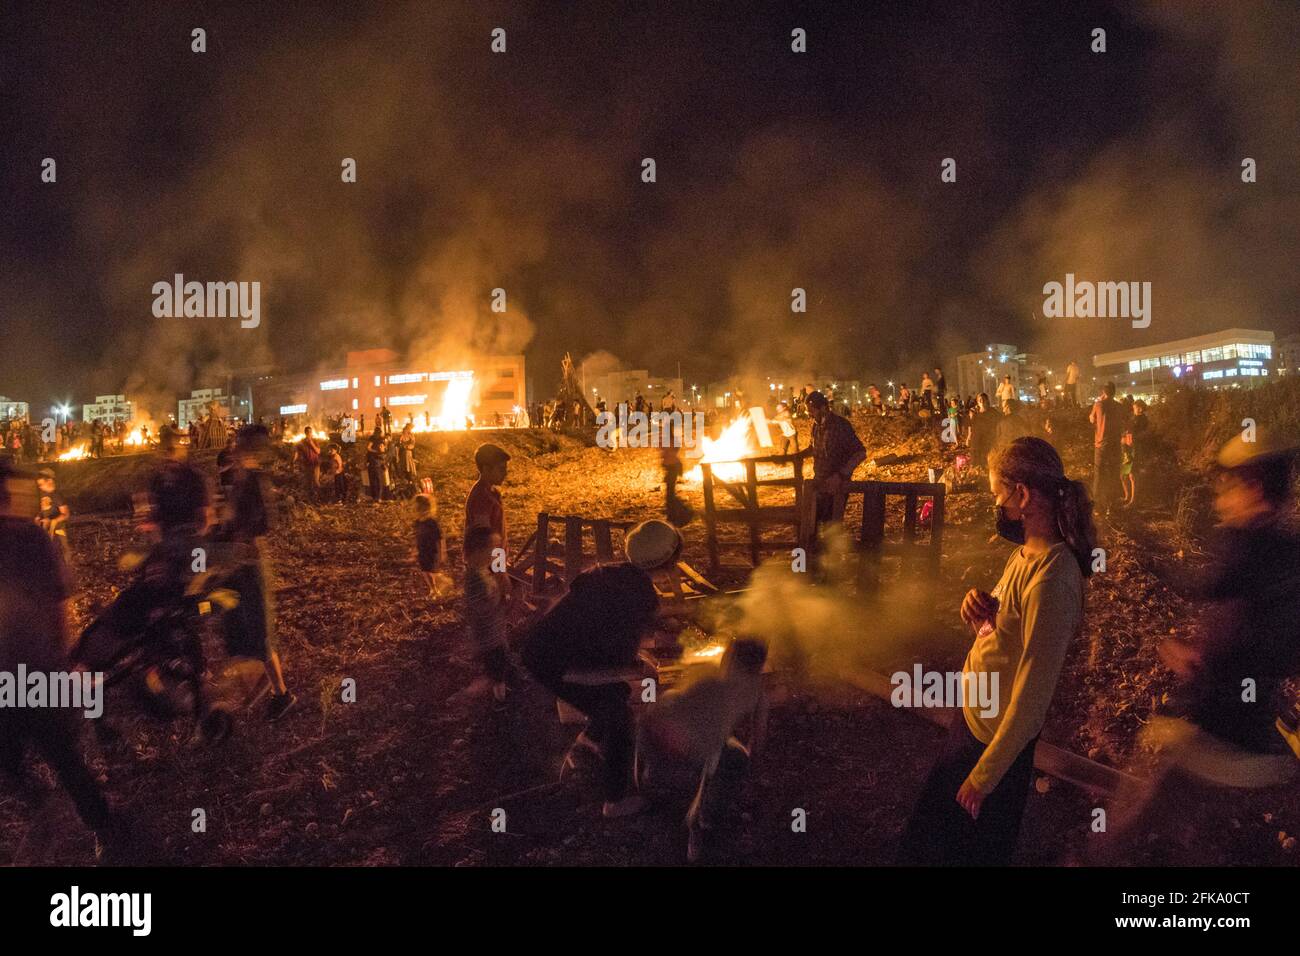 Children prepare a pyre during the Jewish Holiday of Lag Ba'Omer, which takes place every  18th of Hebrew month Iyar. It is customary during this holiday to make fires. This year, due to fire hazard warning, all fires were concentrated to few sites, hence the large number of pyres. Stock Photo